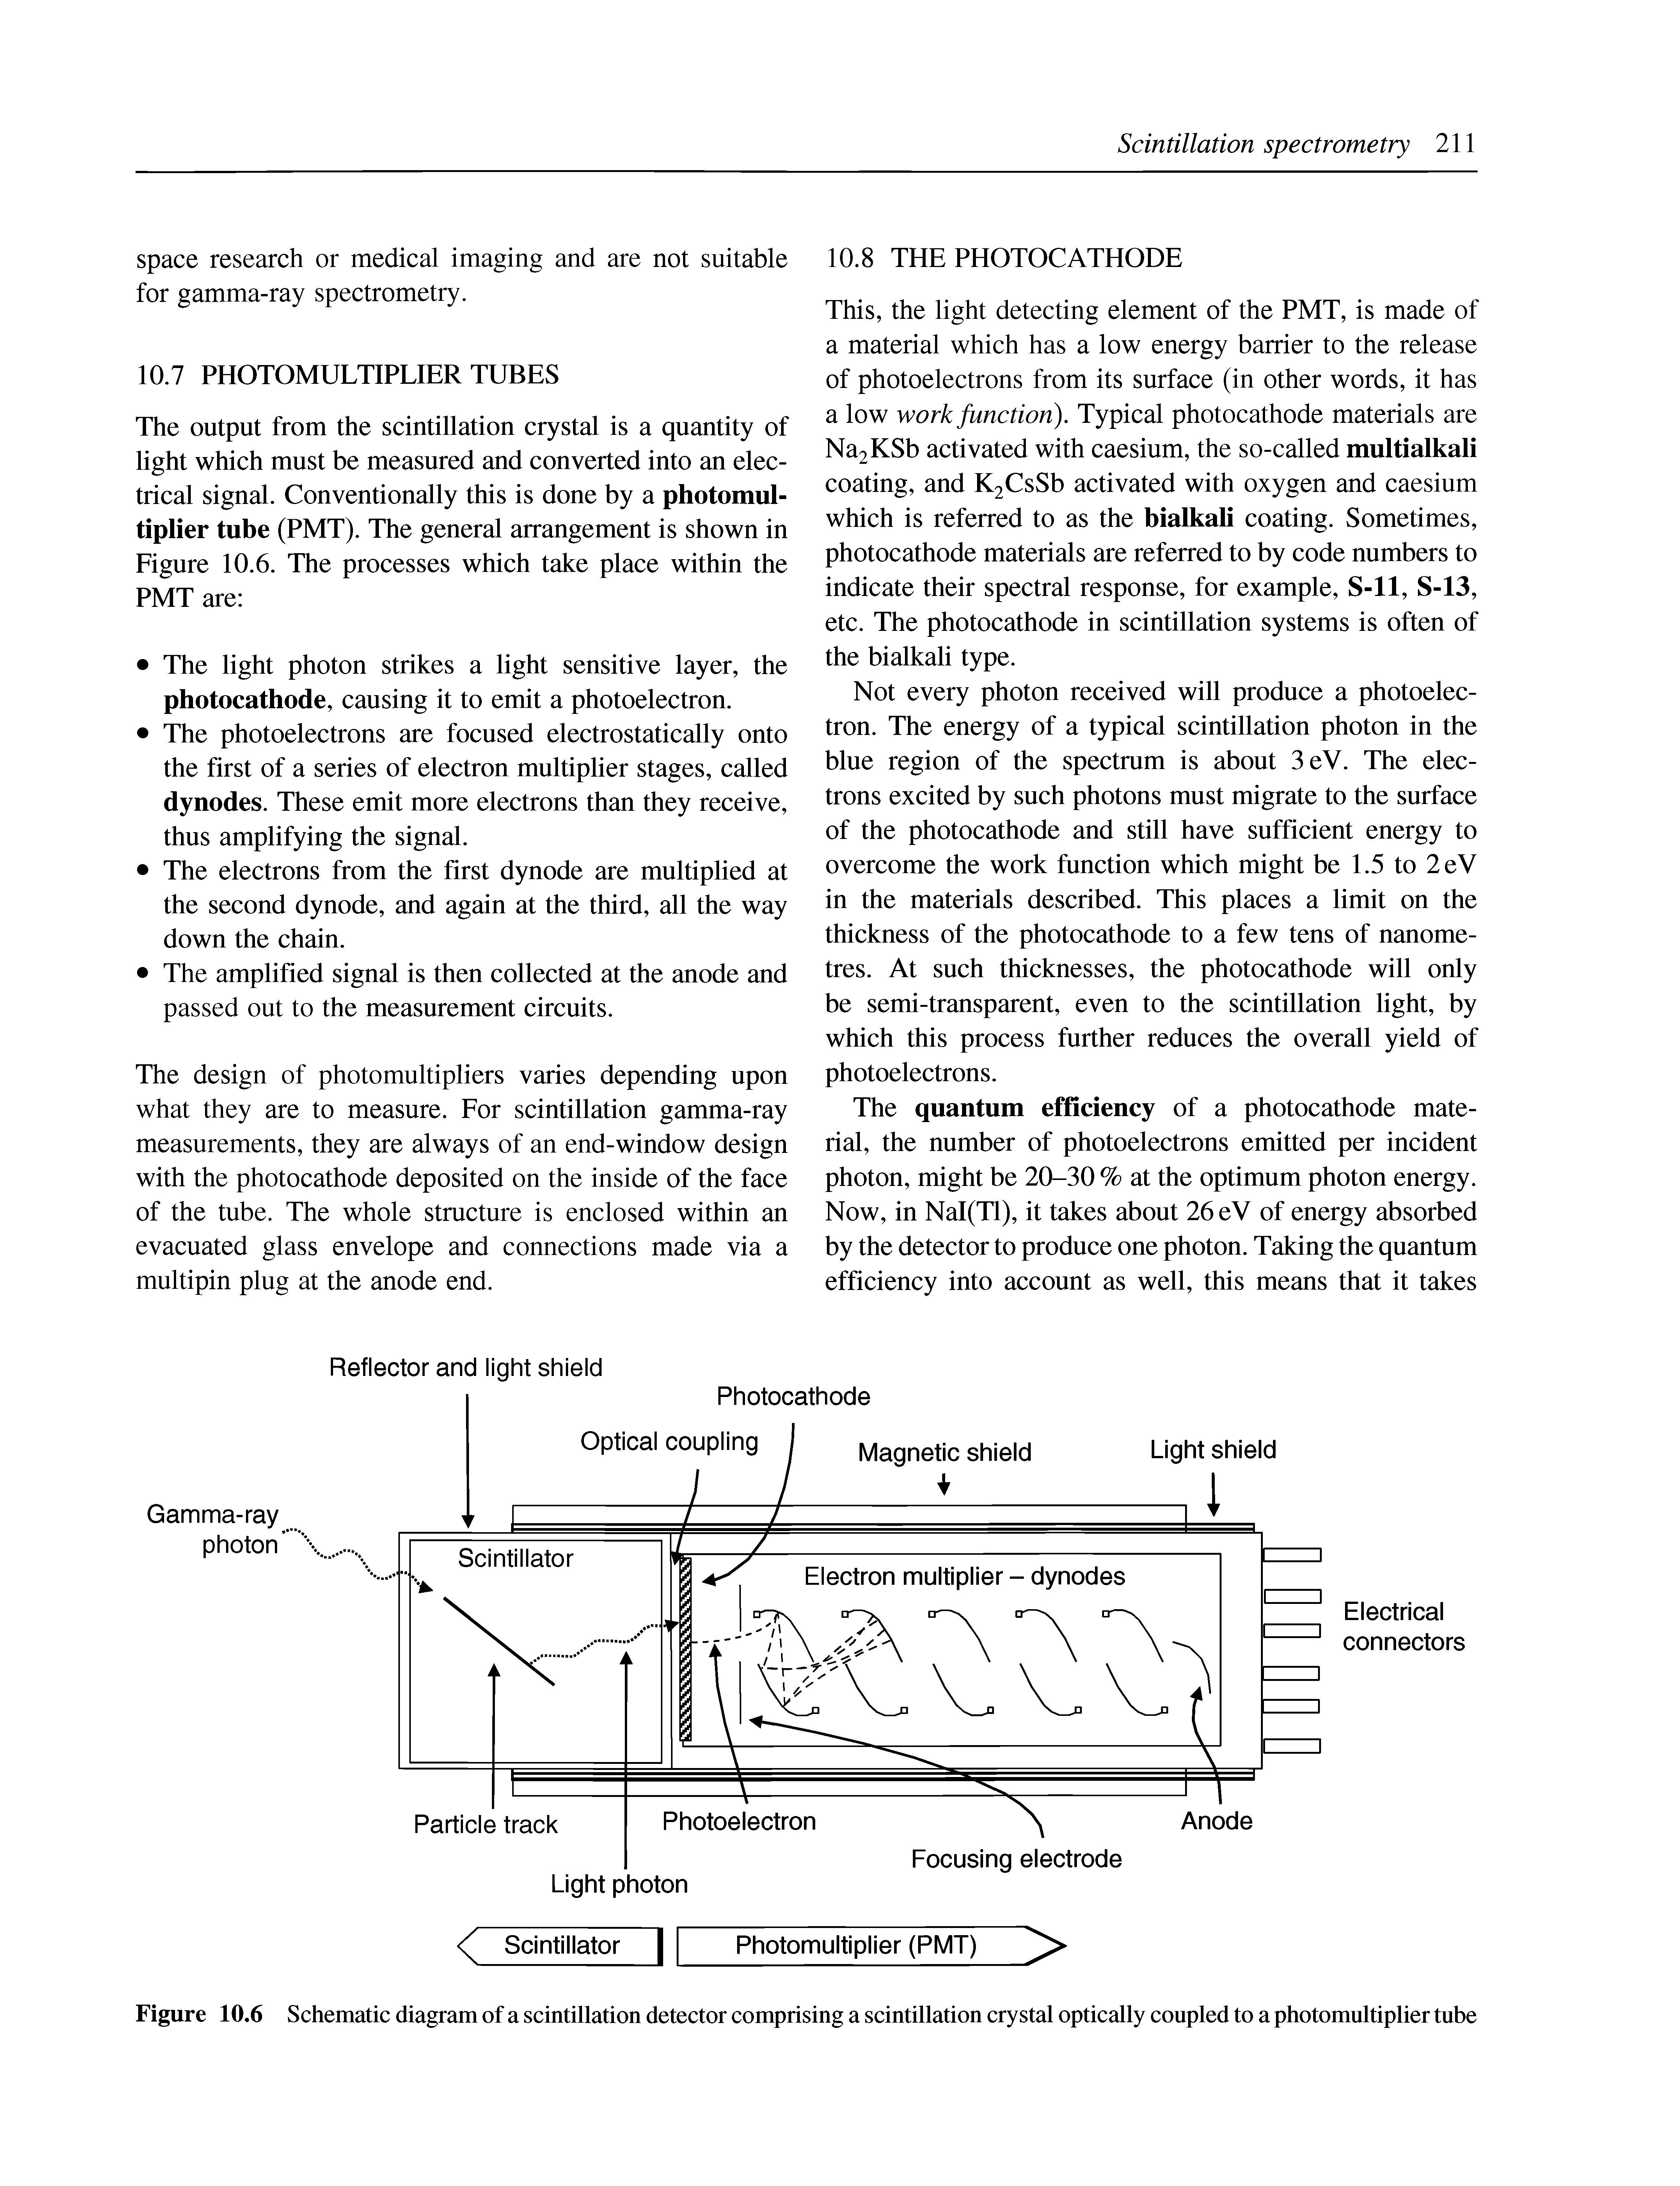 Figure 10.6 Schematic diagram of a scintillation detector comprising a scintillation crystal optically coupled to a photomultiplier tube...